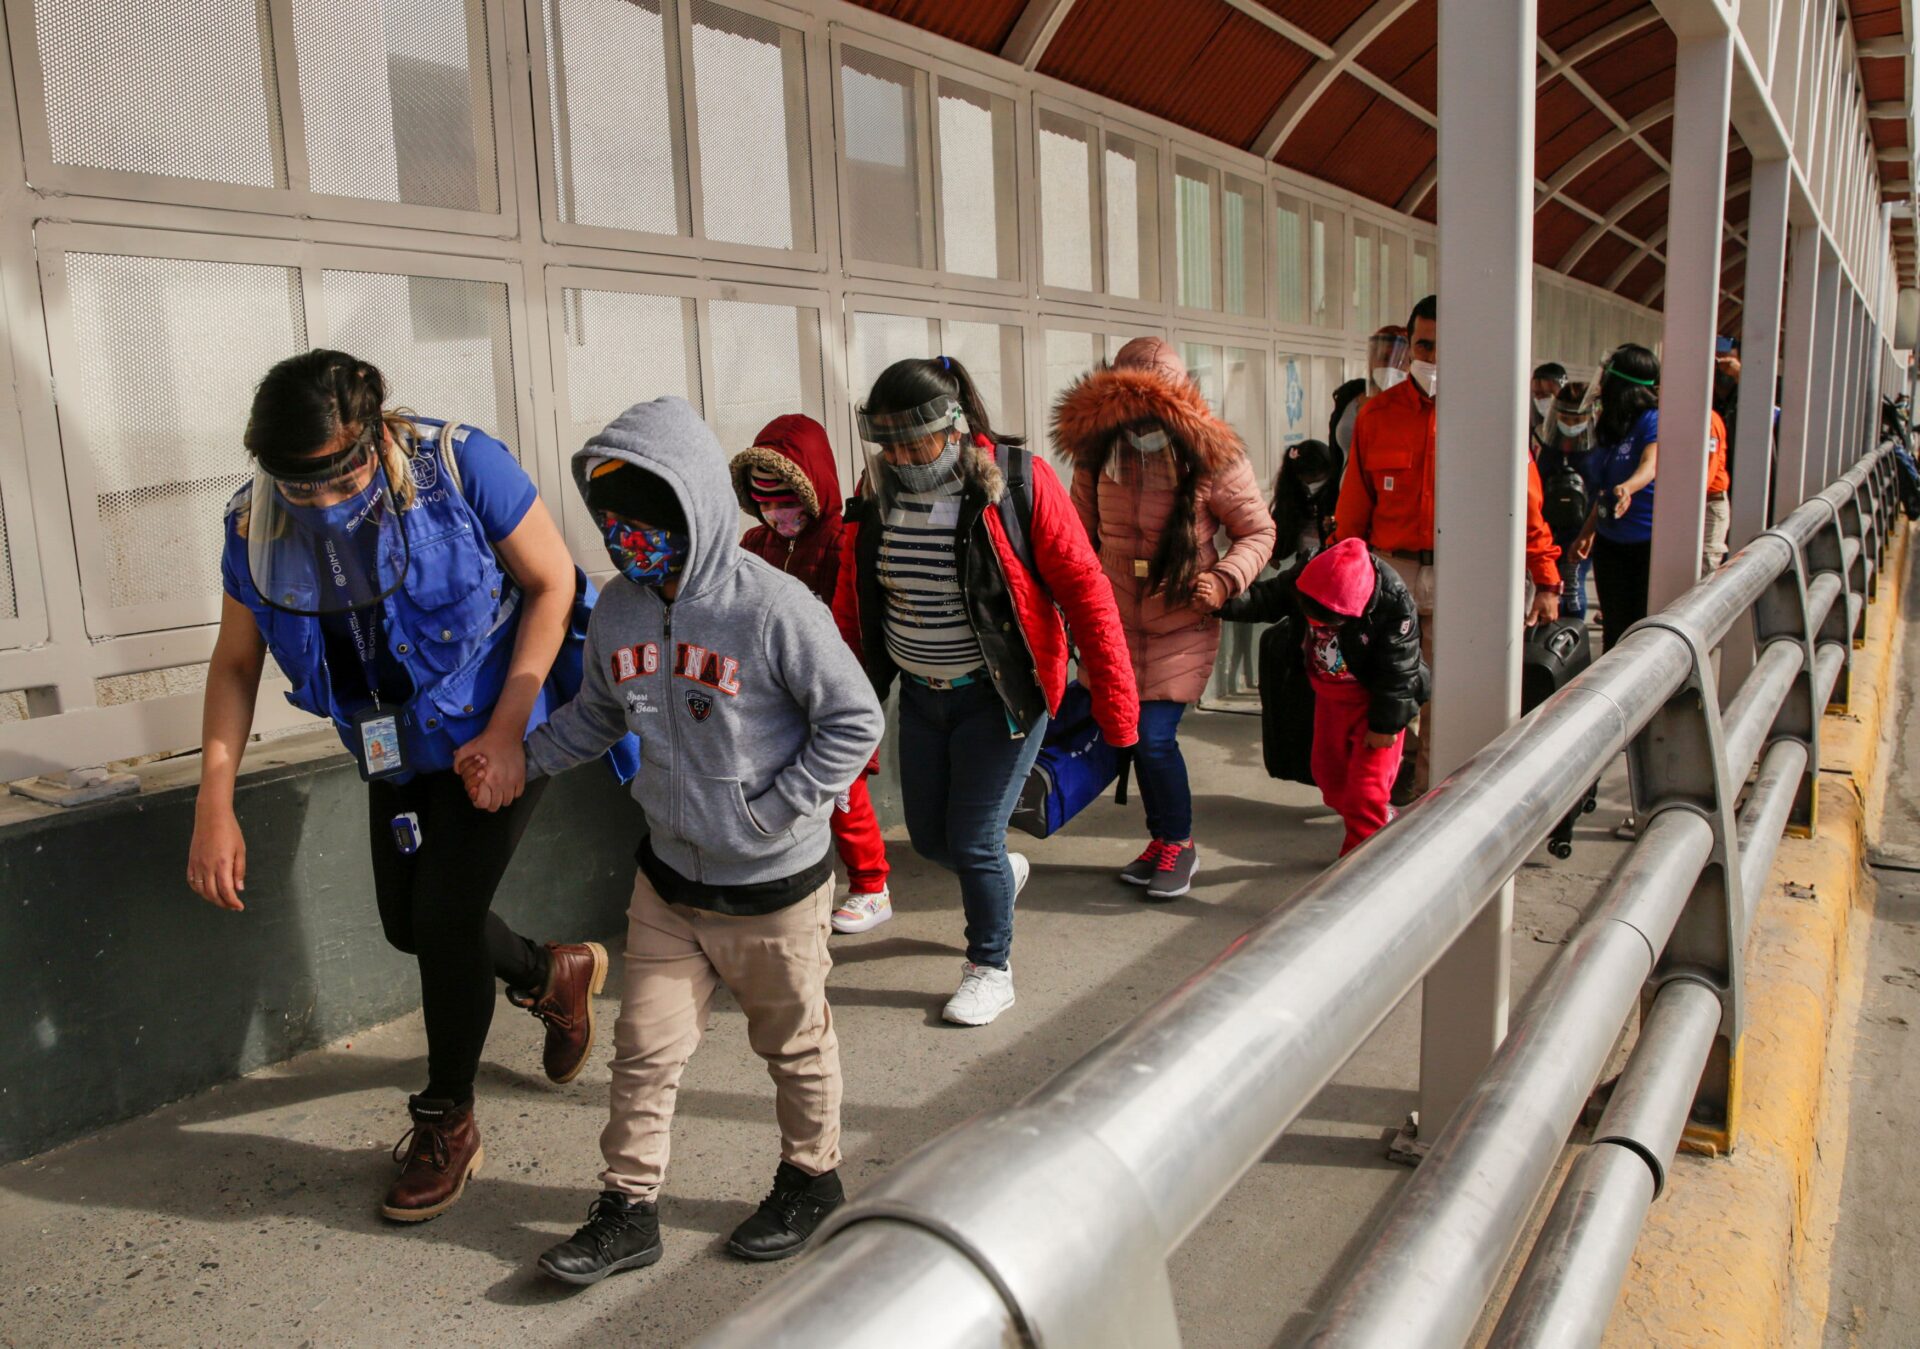 The U.S. defends expulsion of undocumented migrants under health policy, even as it eases border restrictions for travelers with visas-government.vision